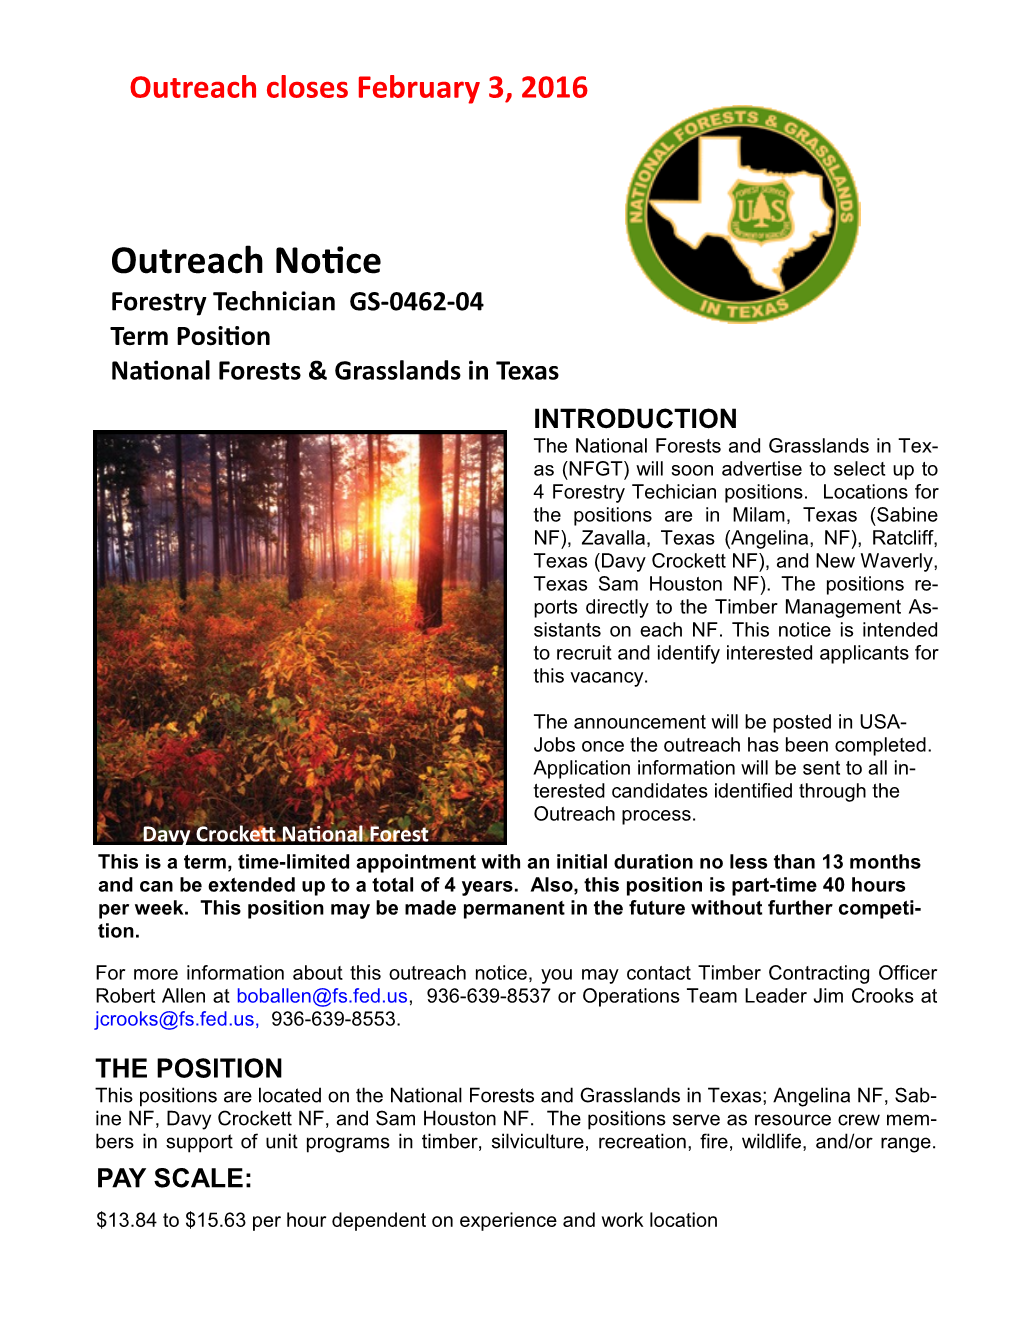 Outreach Notice Forestry Technician GS-0462-04 Term Position National